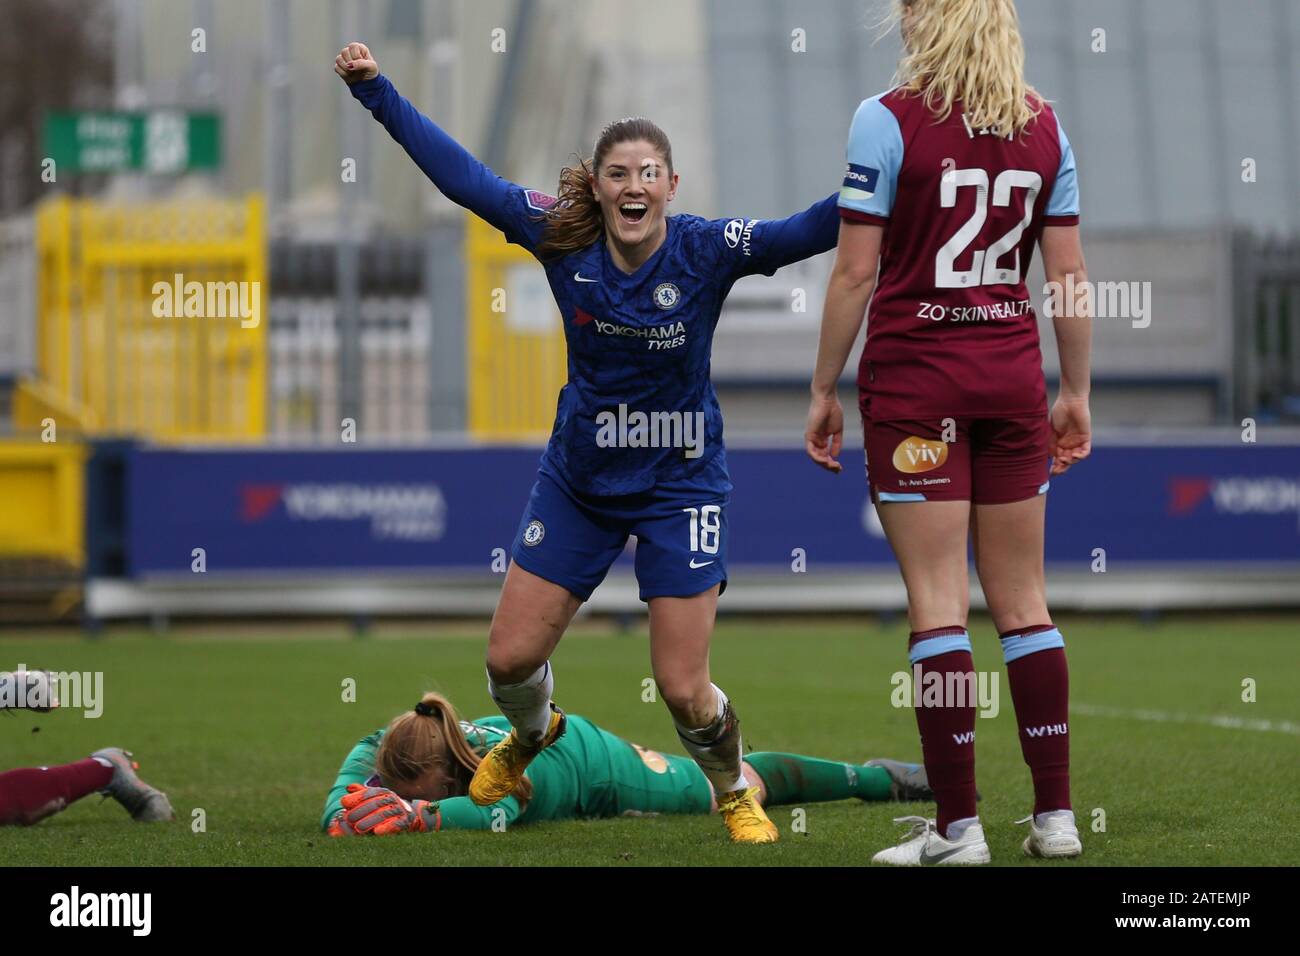 London, UK. 2nd February 2020. Maren Mjelde of Chelsea Women celebrating her team's sixth goal during the Barclays FA Women's Super League match between Chelsea and West Ham United at the Kingsmeadow, Kingston on Thames on Sunday 2nd February 2020. (Credit: Jacques Feeney | MI News) Photograph may only be used for newspaper and/or magazine editorial purposes, license required for commercial use Credit: MI News & Sport /Alamy Live News Stock Photo